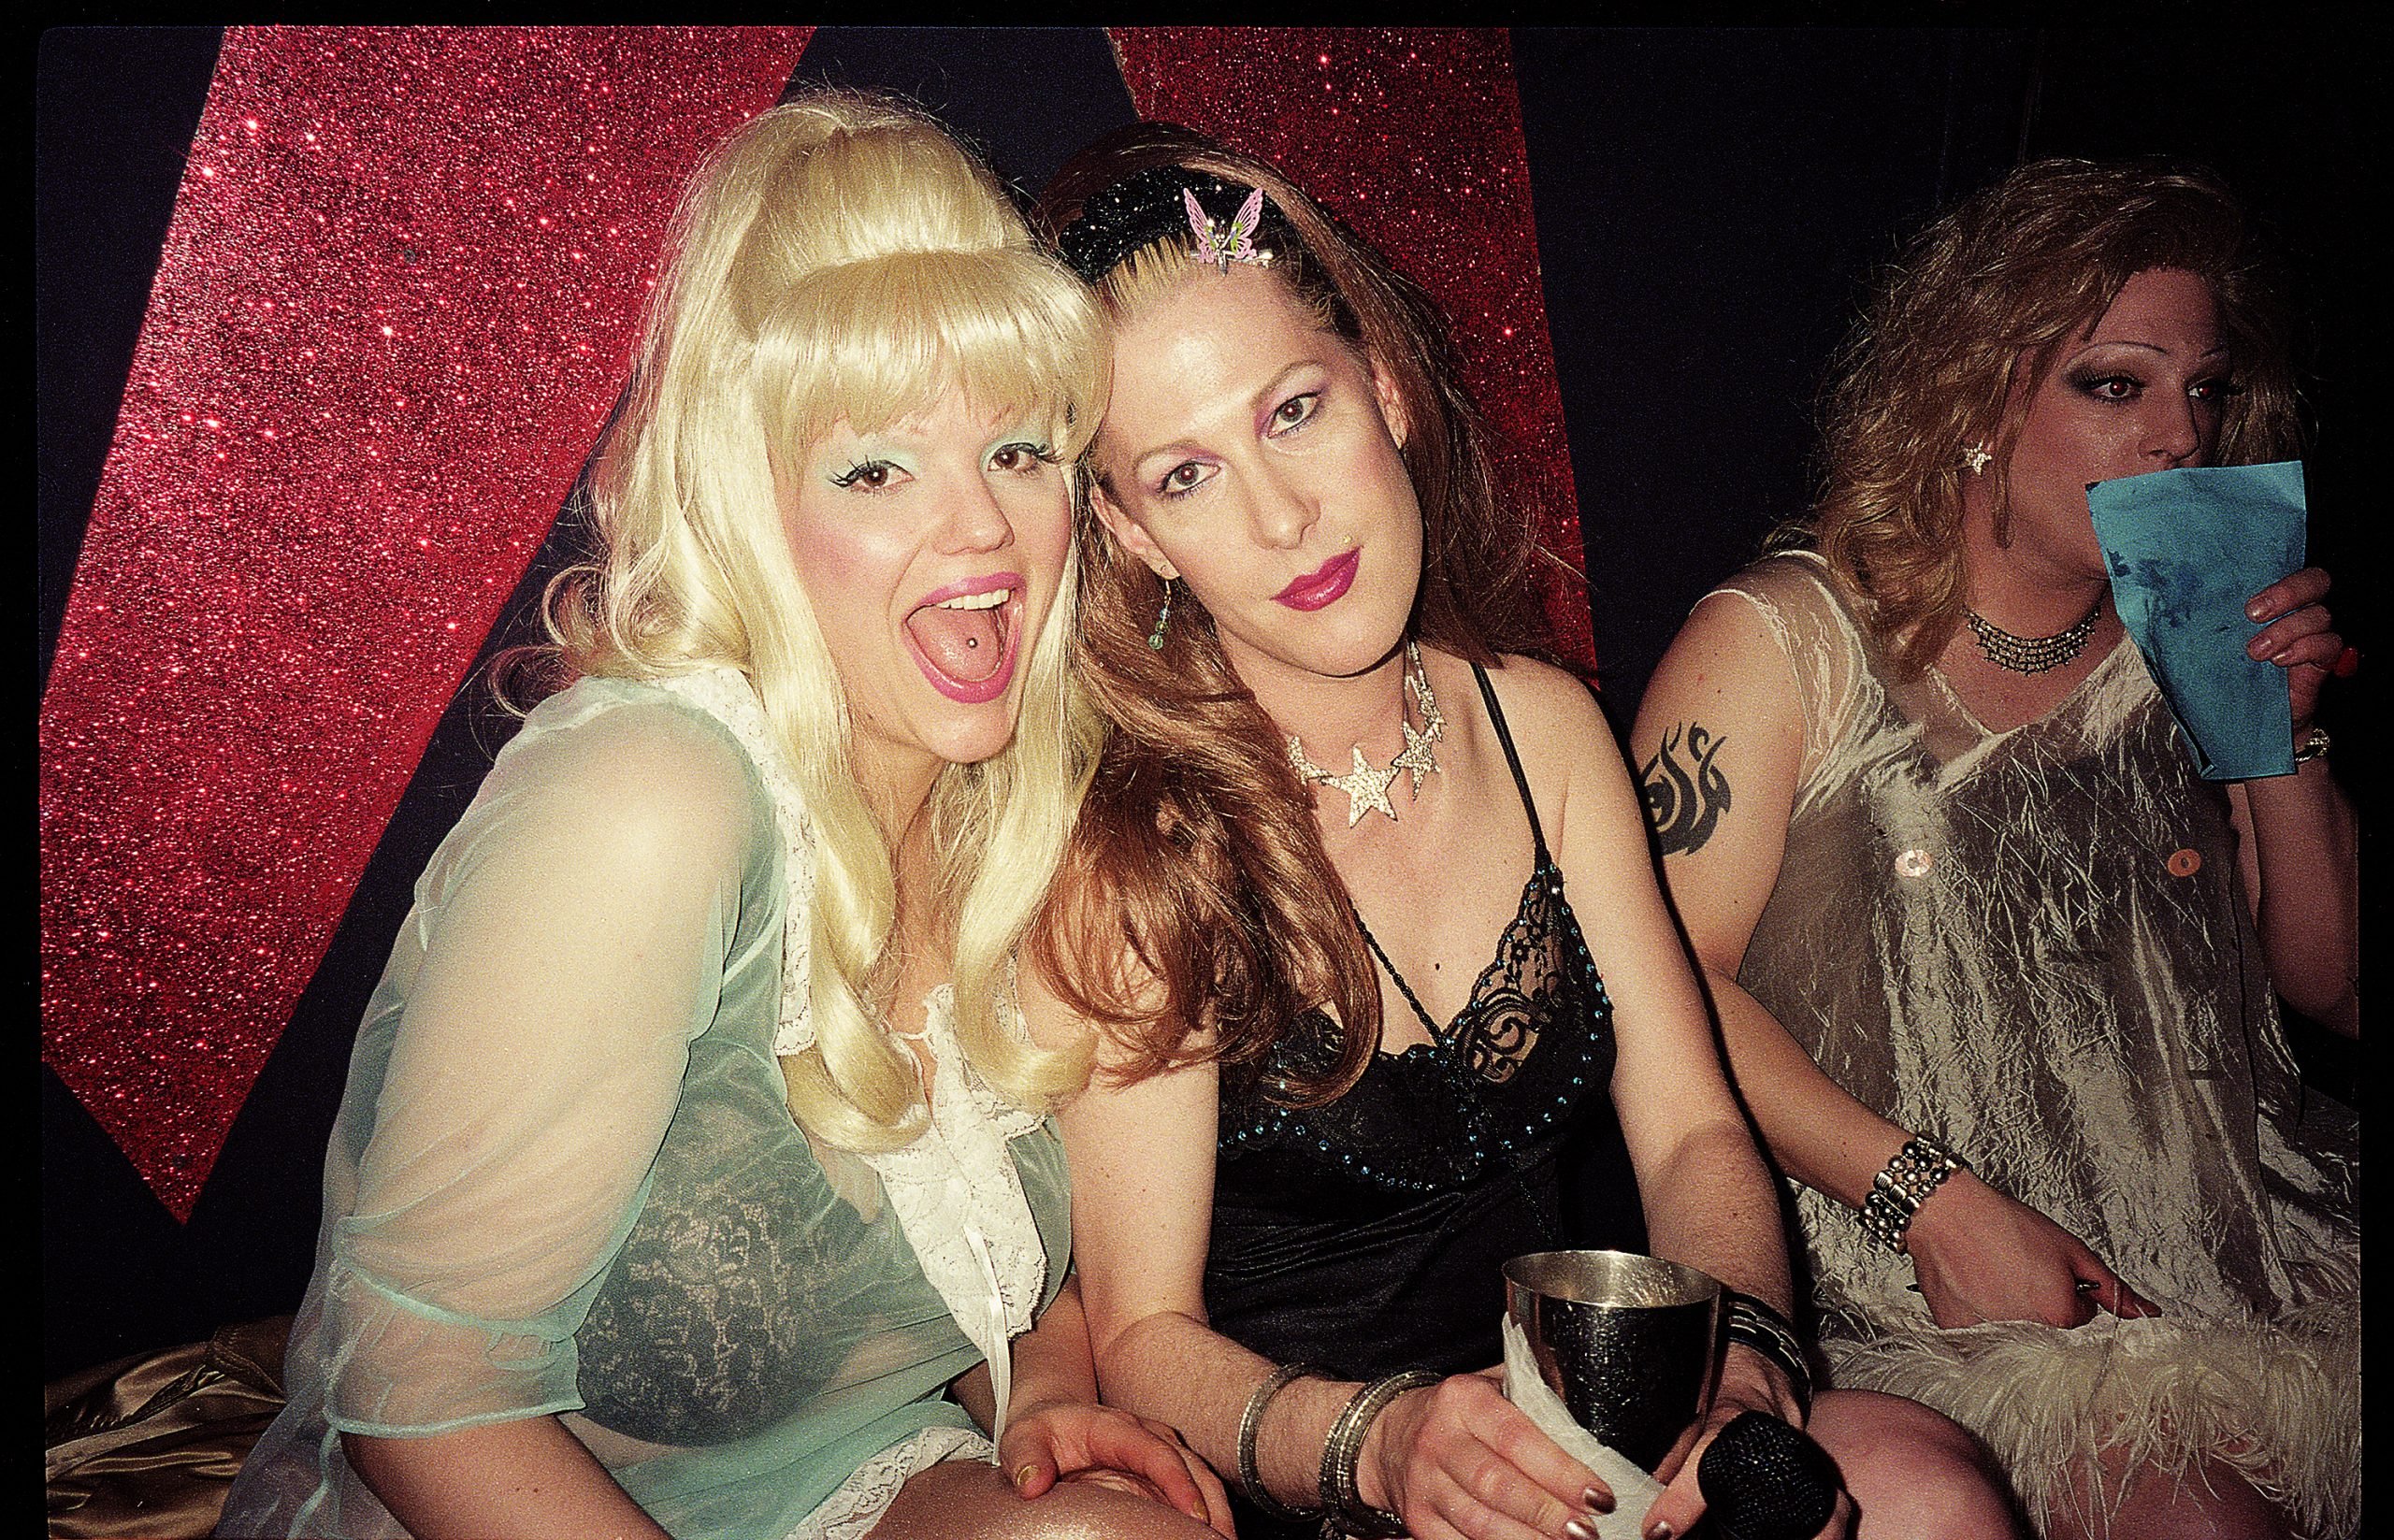 Relive Foxy, the Legendary Late-1990s New York Queer Party, Through These Never-Before-Published Photographs